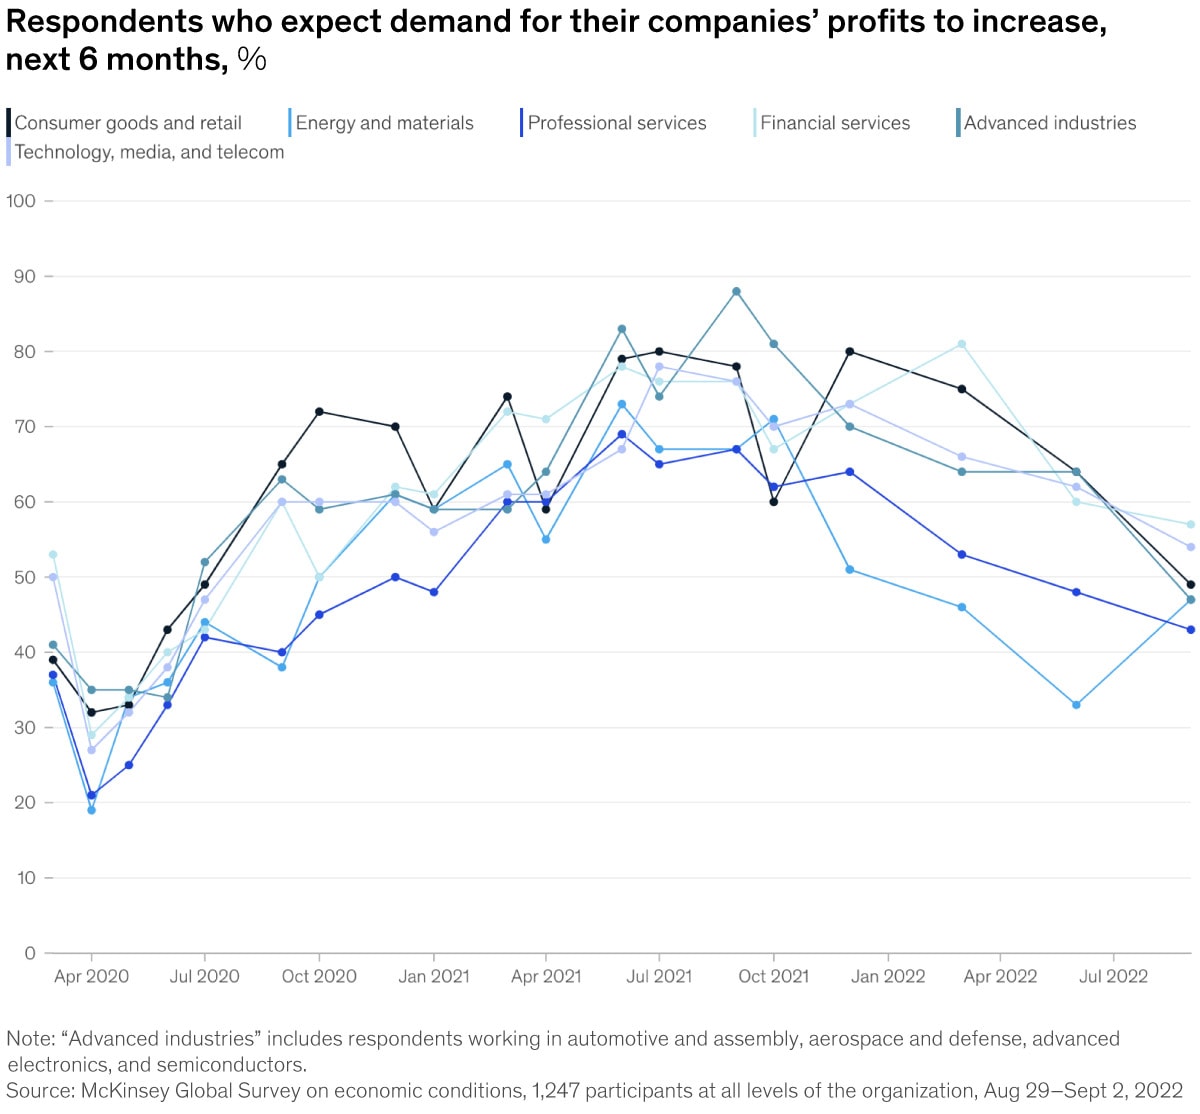 Chart of respondents who expect demand for their companies' profits to increase in the next six months, by sector